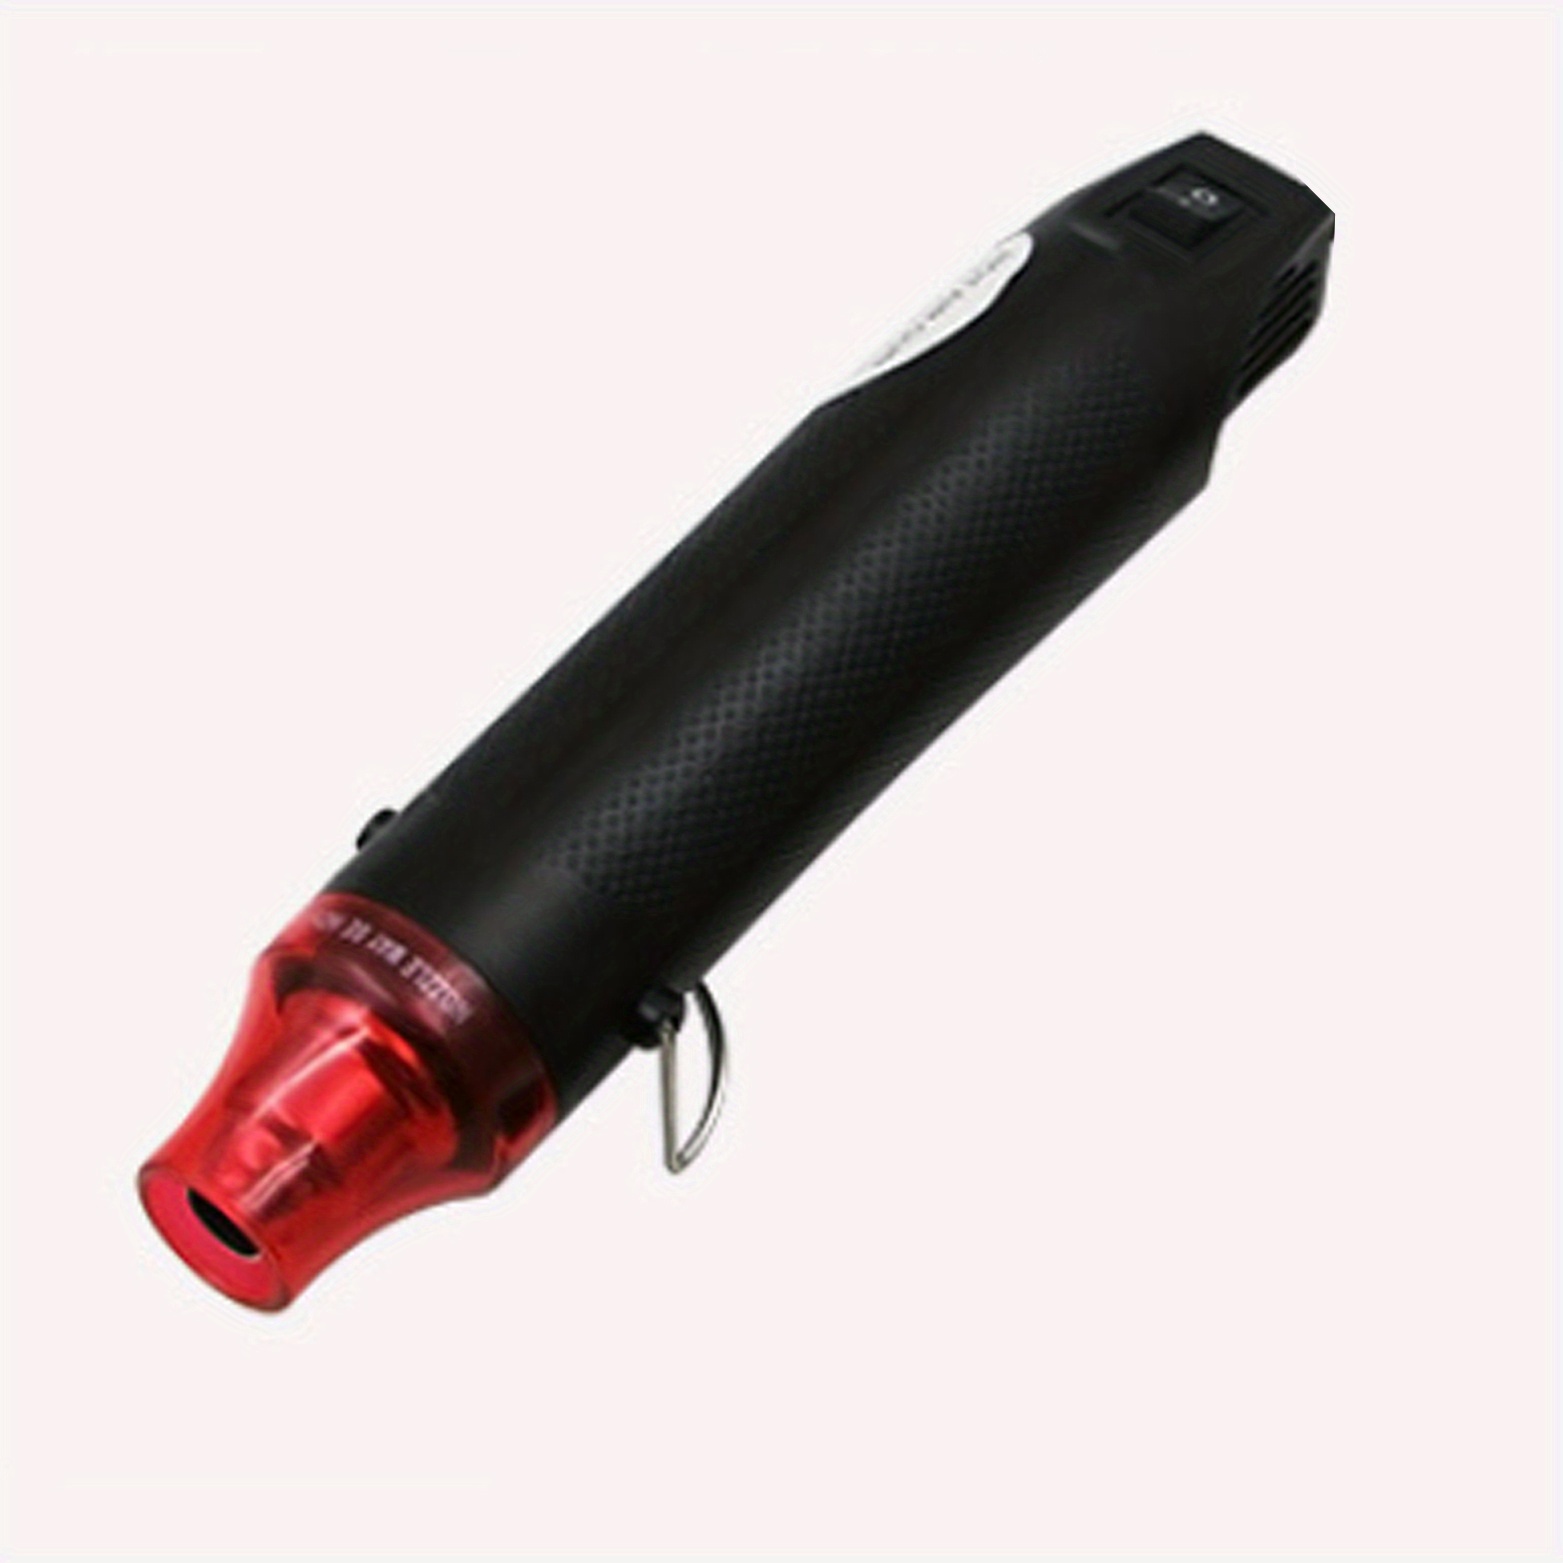 Mini Handheld Heat Gun, Maximum Temperature 200℃/392℉, For Shrink Wrapping,  Epoxy Resin Supplies, Crafts, Candle Making, Wire & Cable Repair, DIY